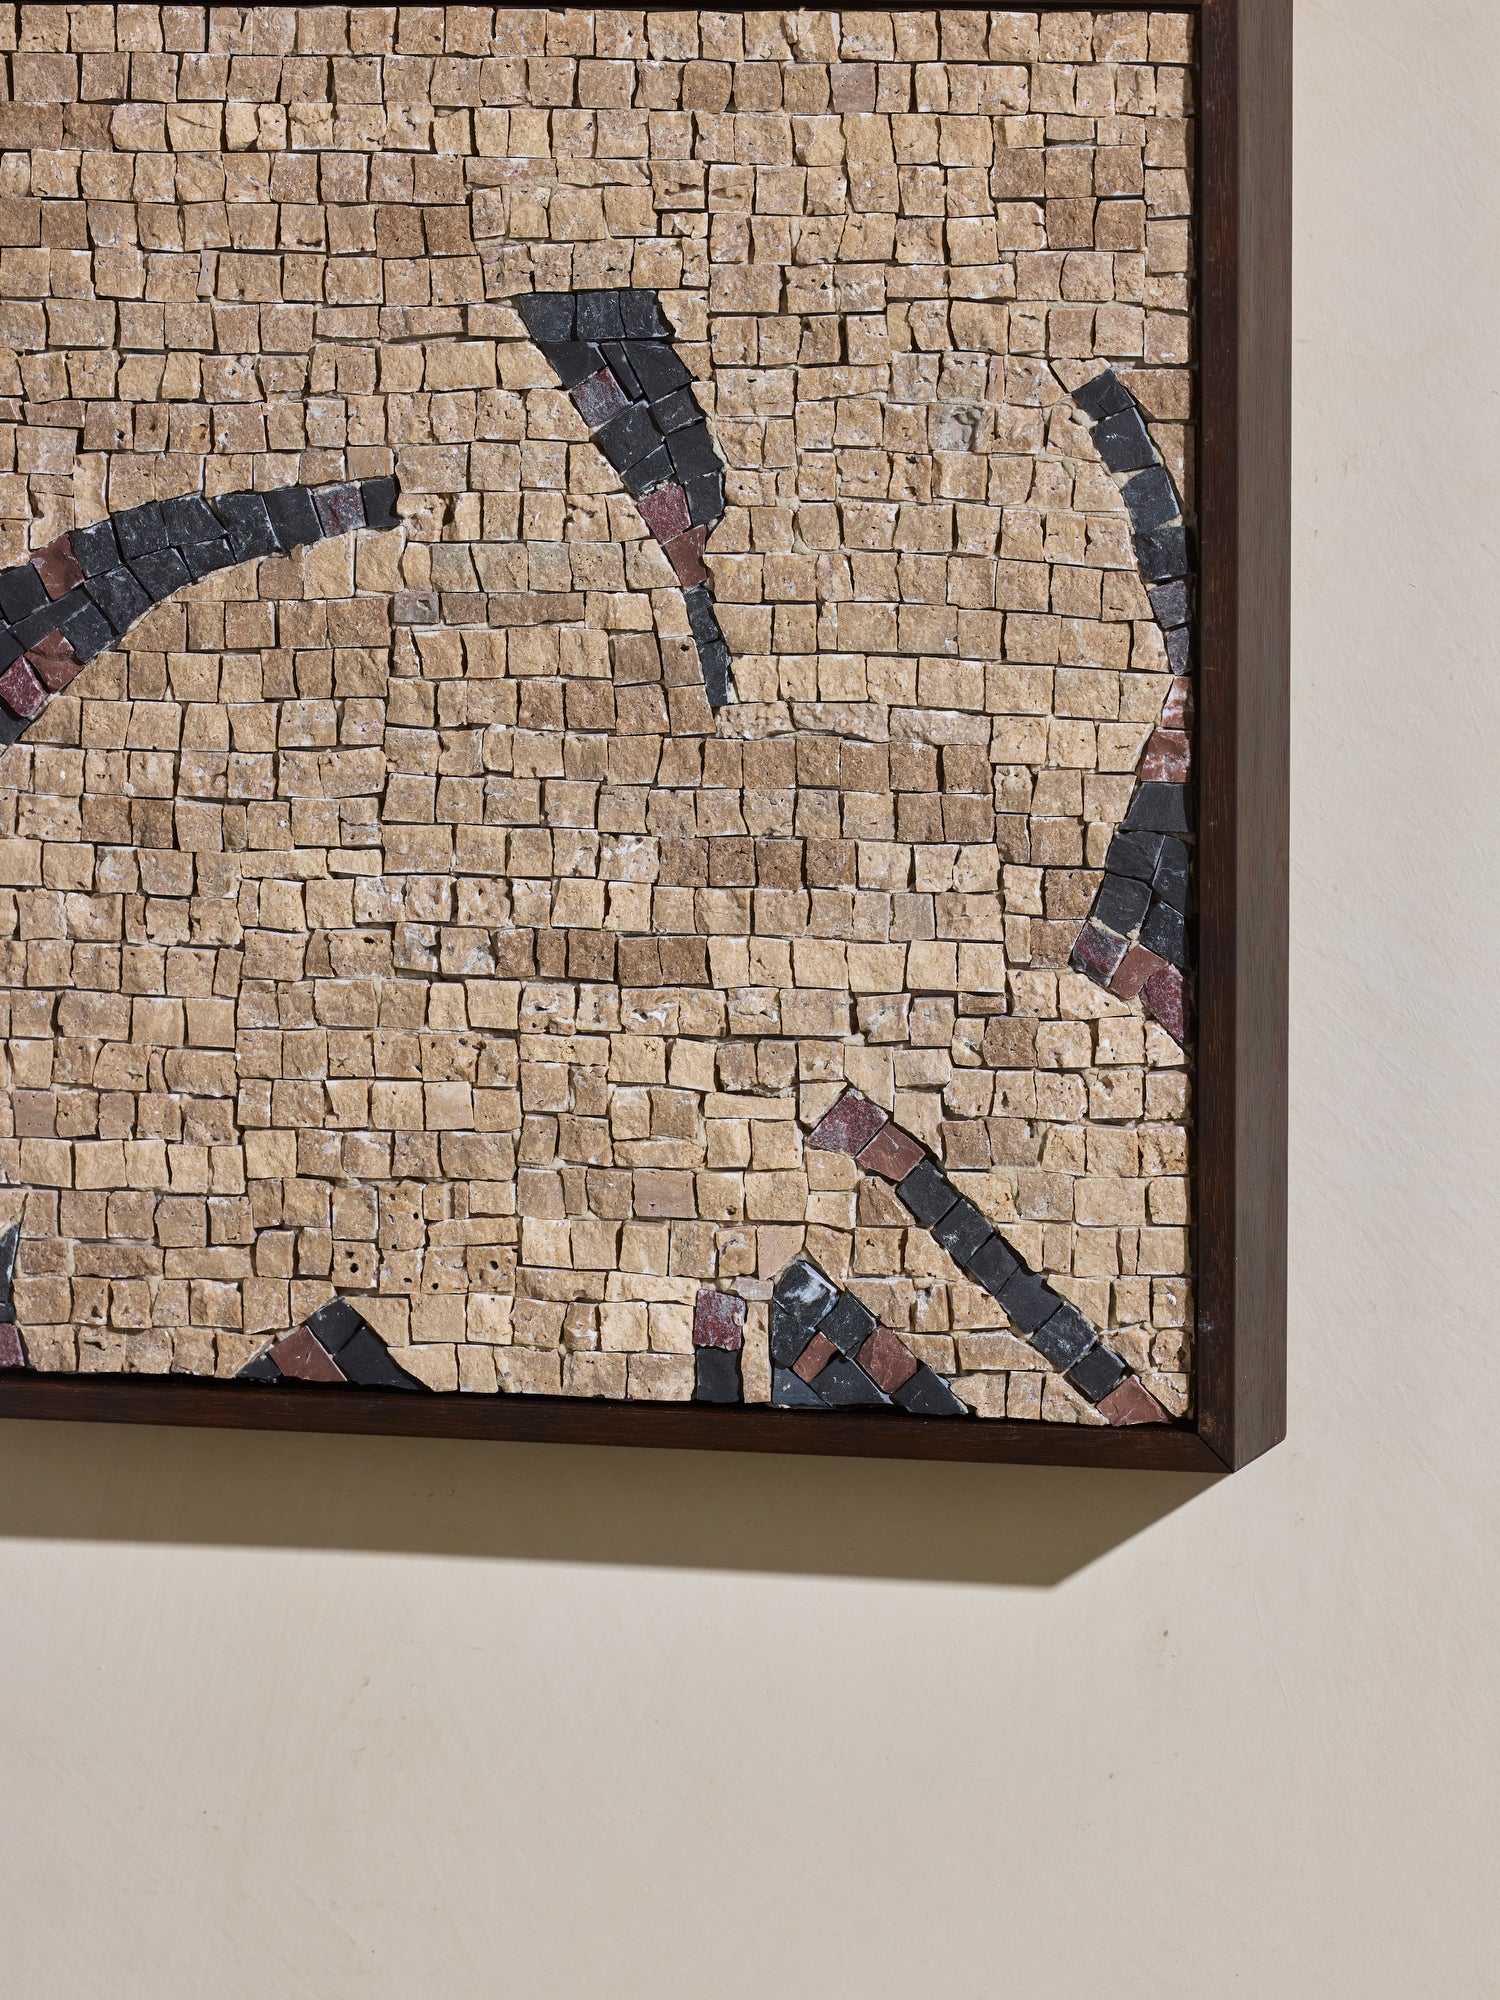 Close up of mosaic square stone art piece with beige and black details and wooden framing.